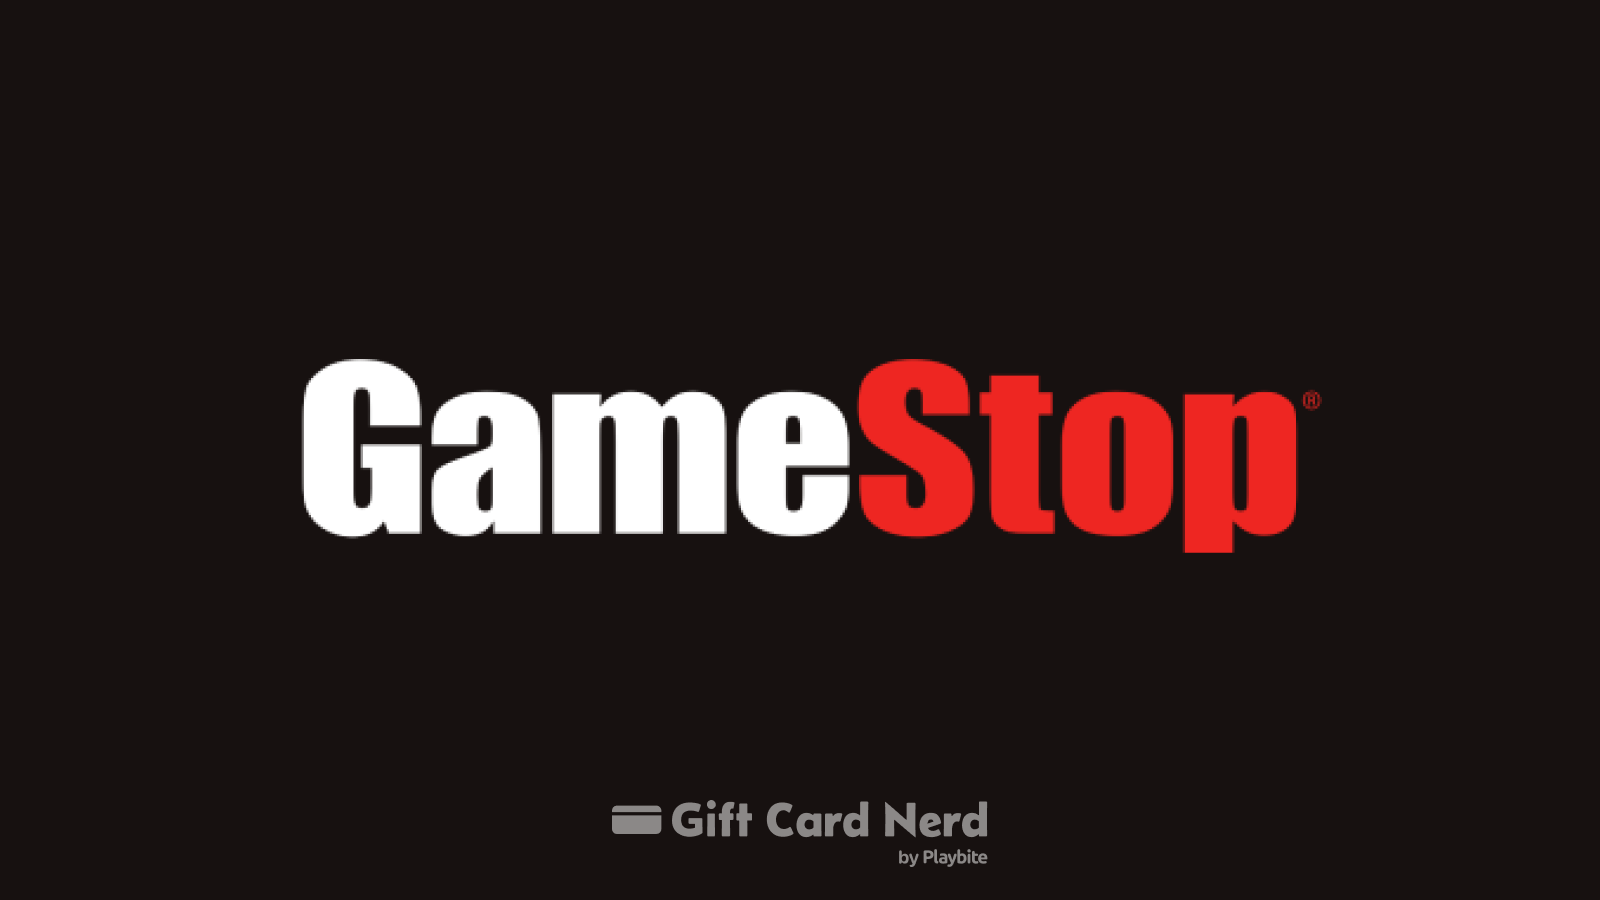 Can I Use a GameStop Gift Card on Roblox?